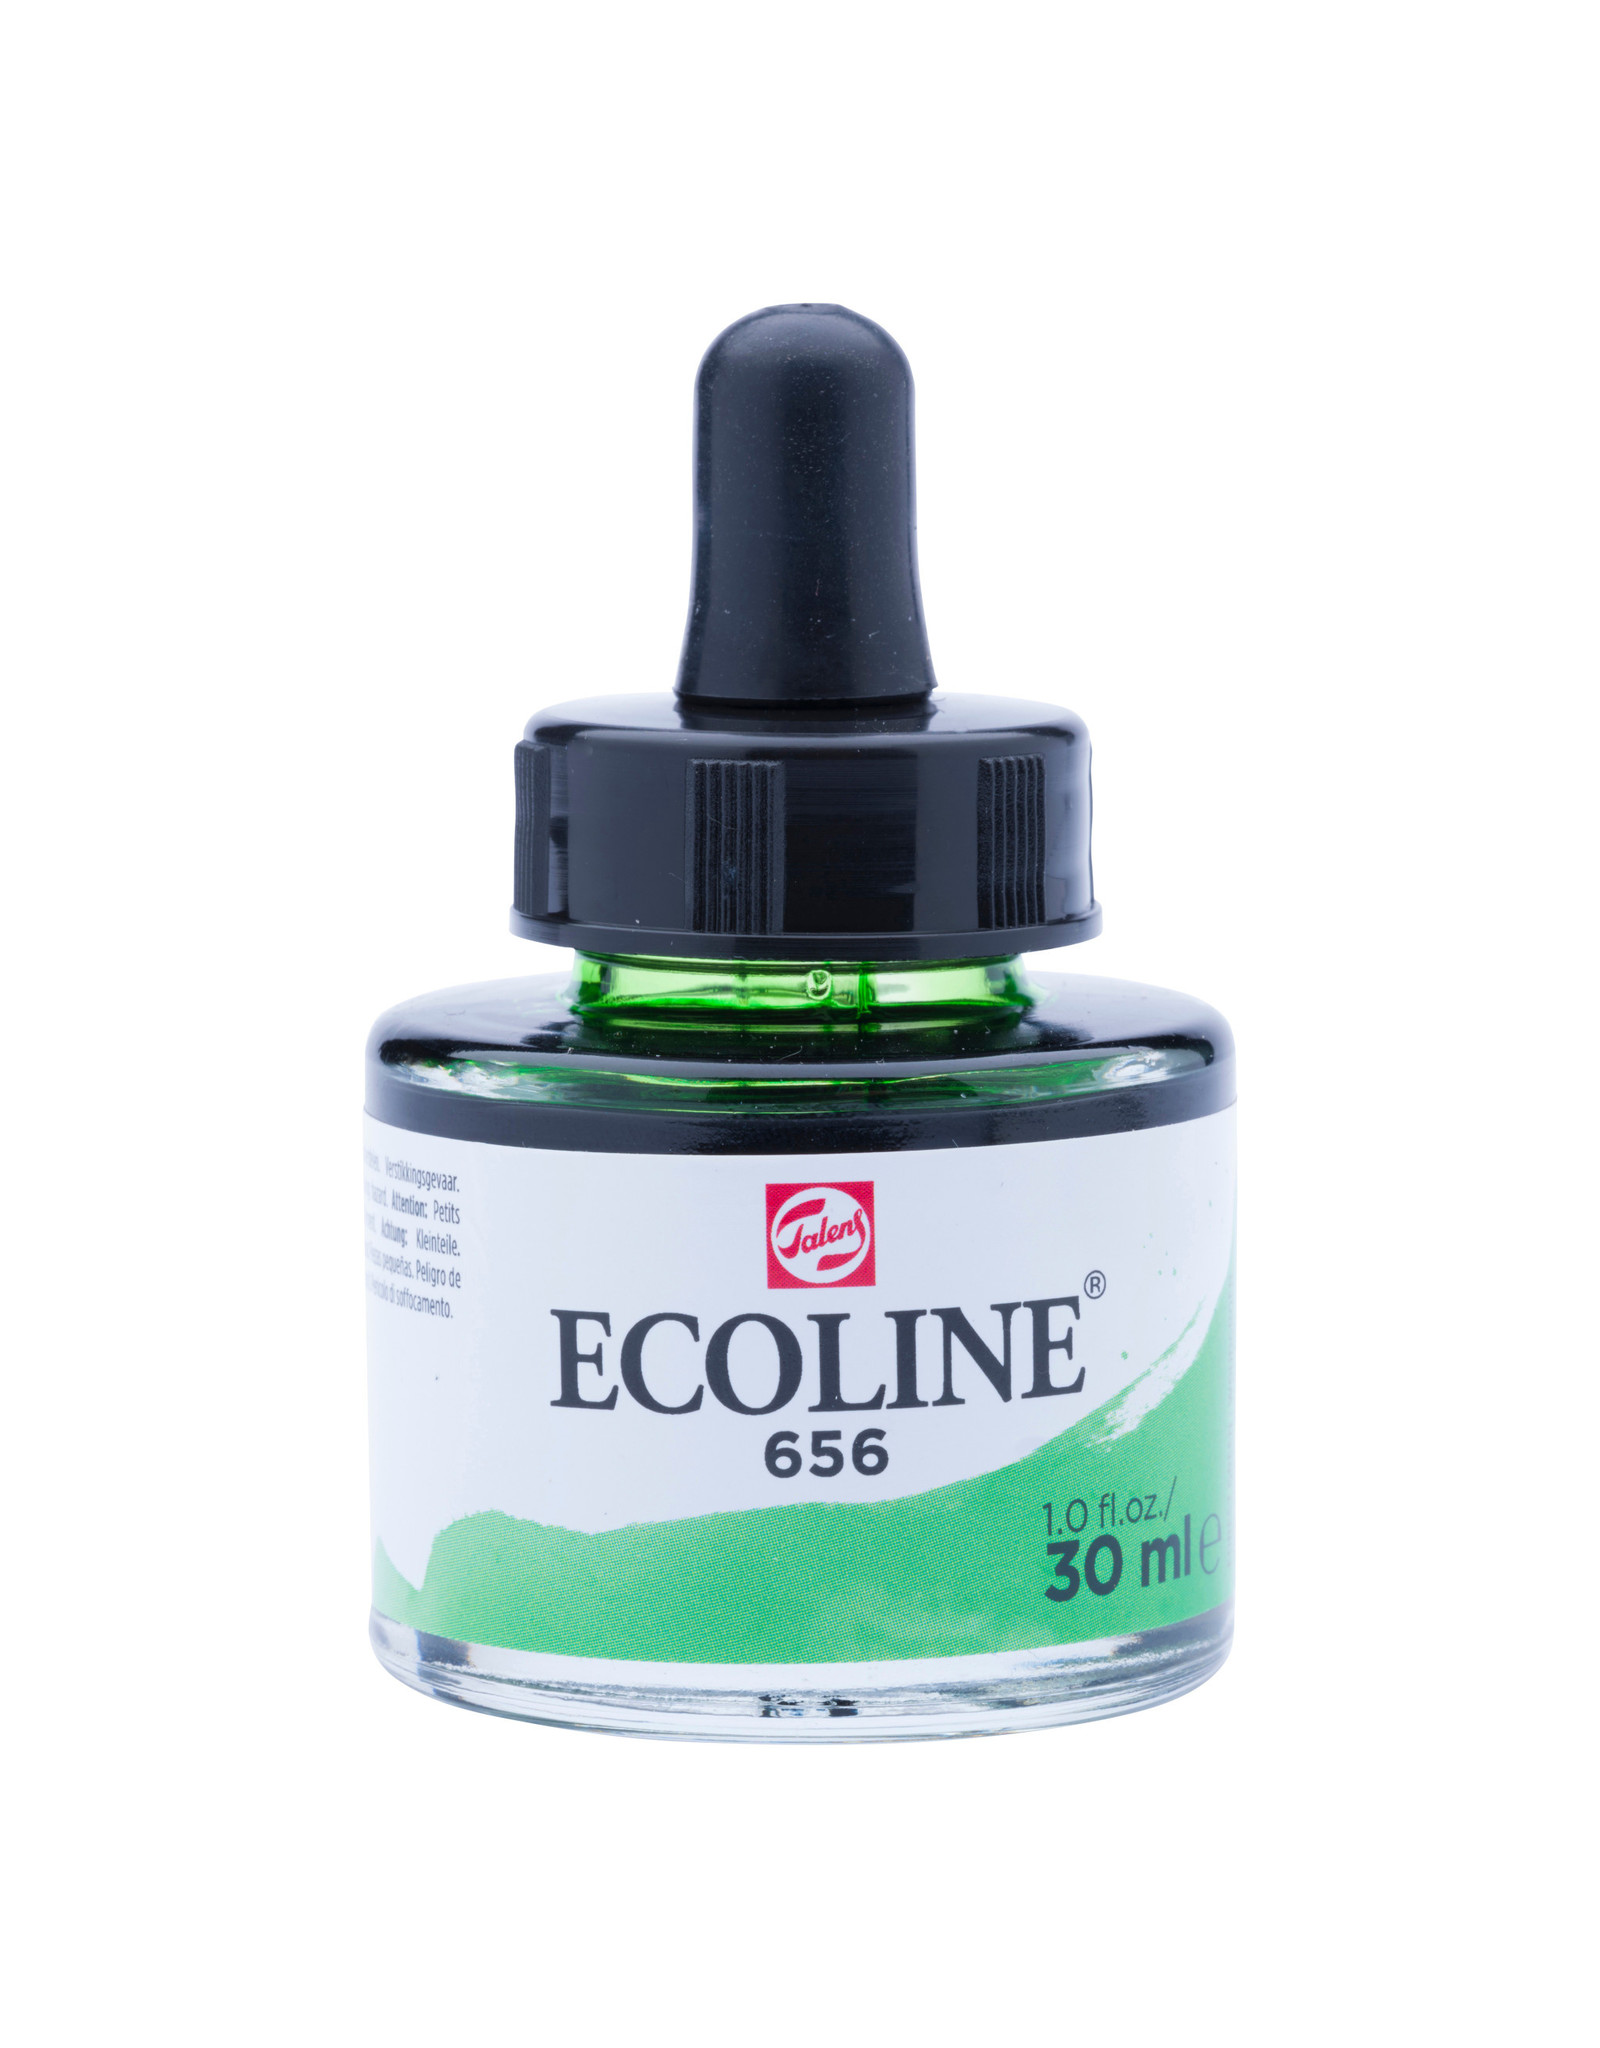 Royal Talens Ecoline Liquid Watercolor, Forest Green 30ml